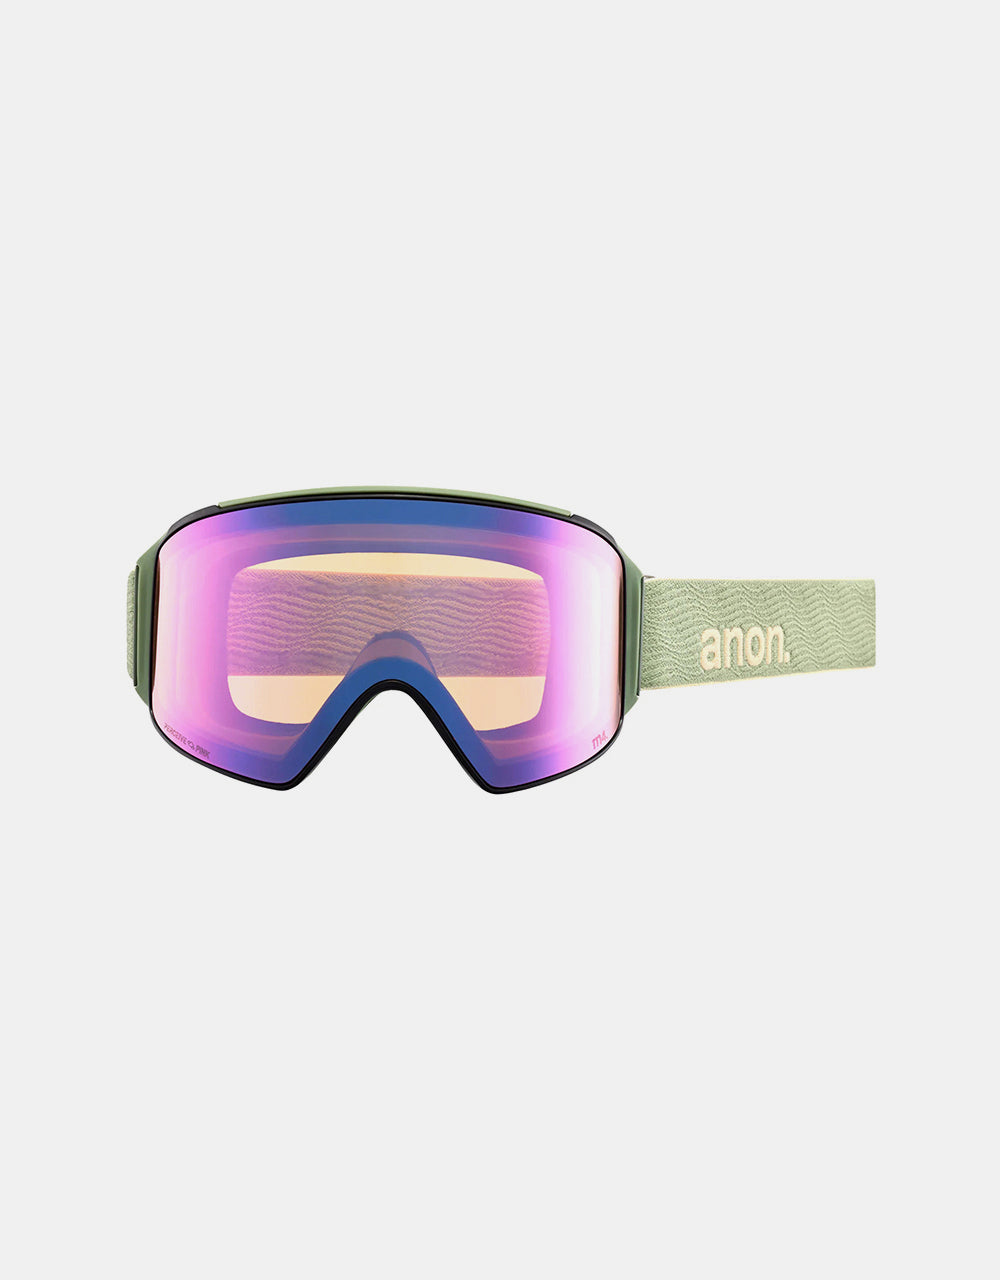 Anon M4 MFI® Face Mask Cylindrical Snowboard Goggles - Hedge/Perceive Variable Green